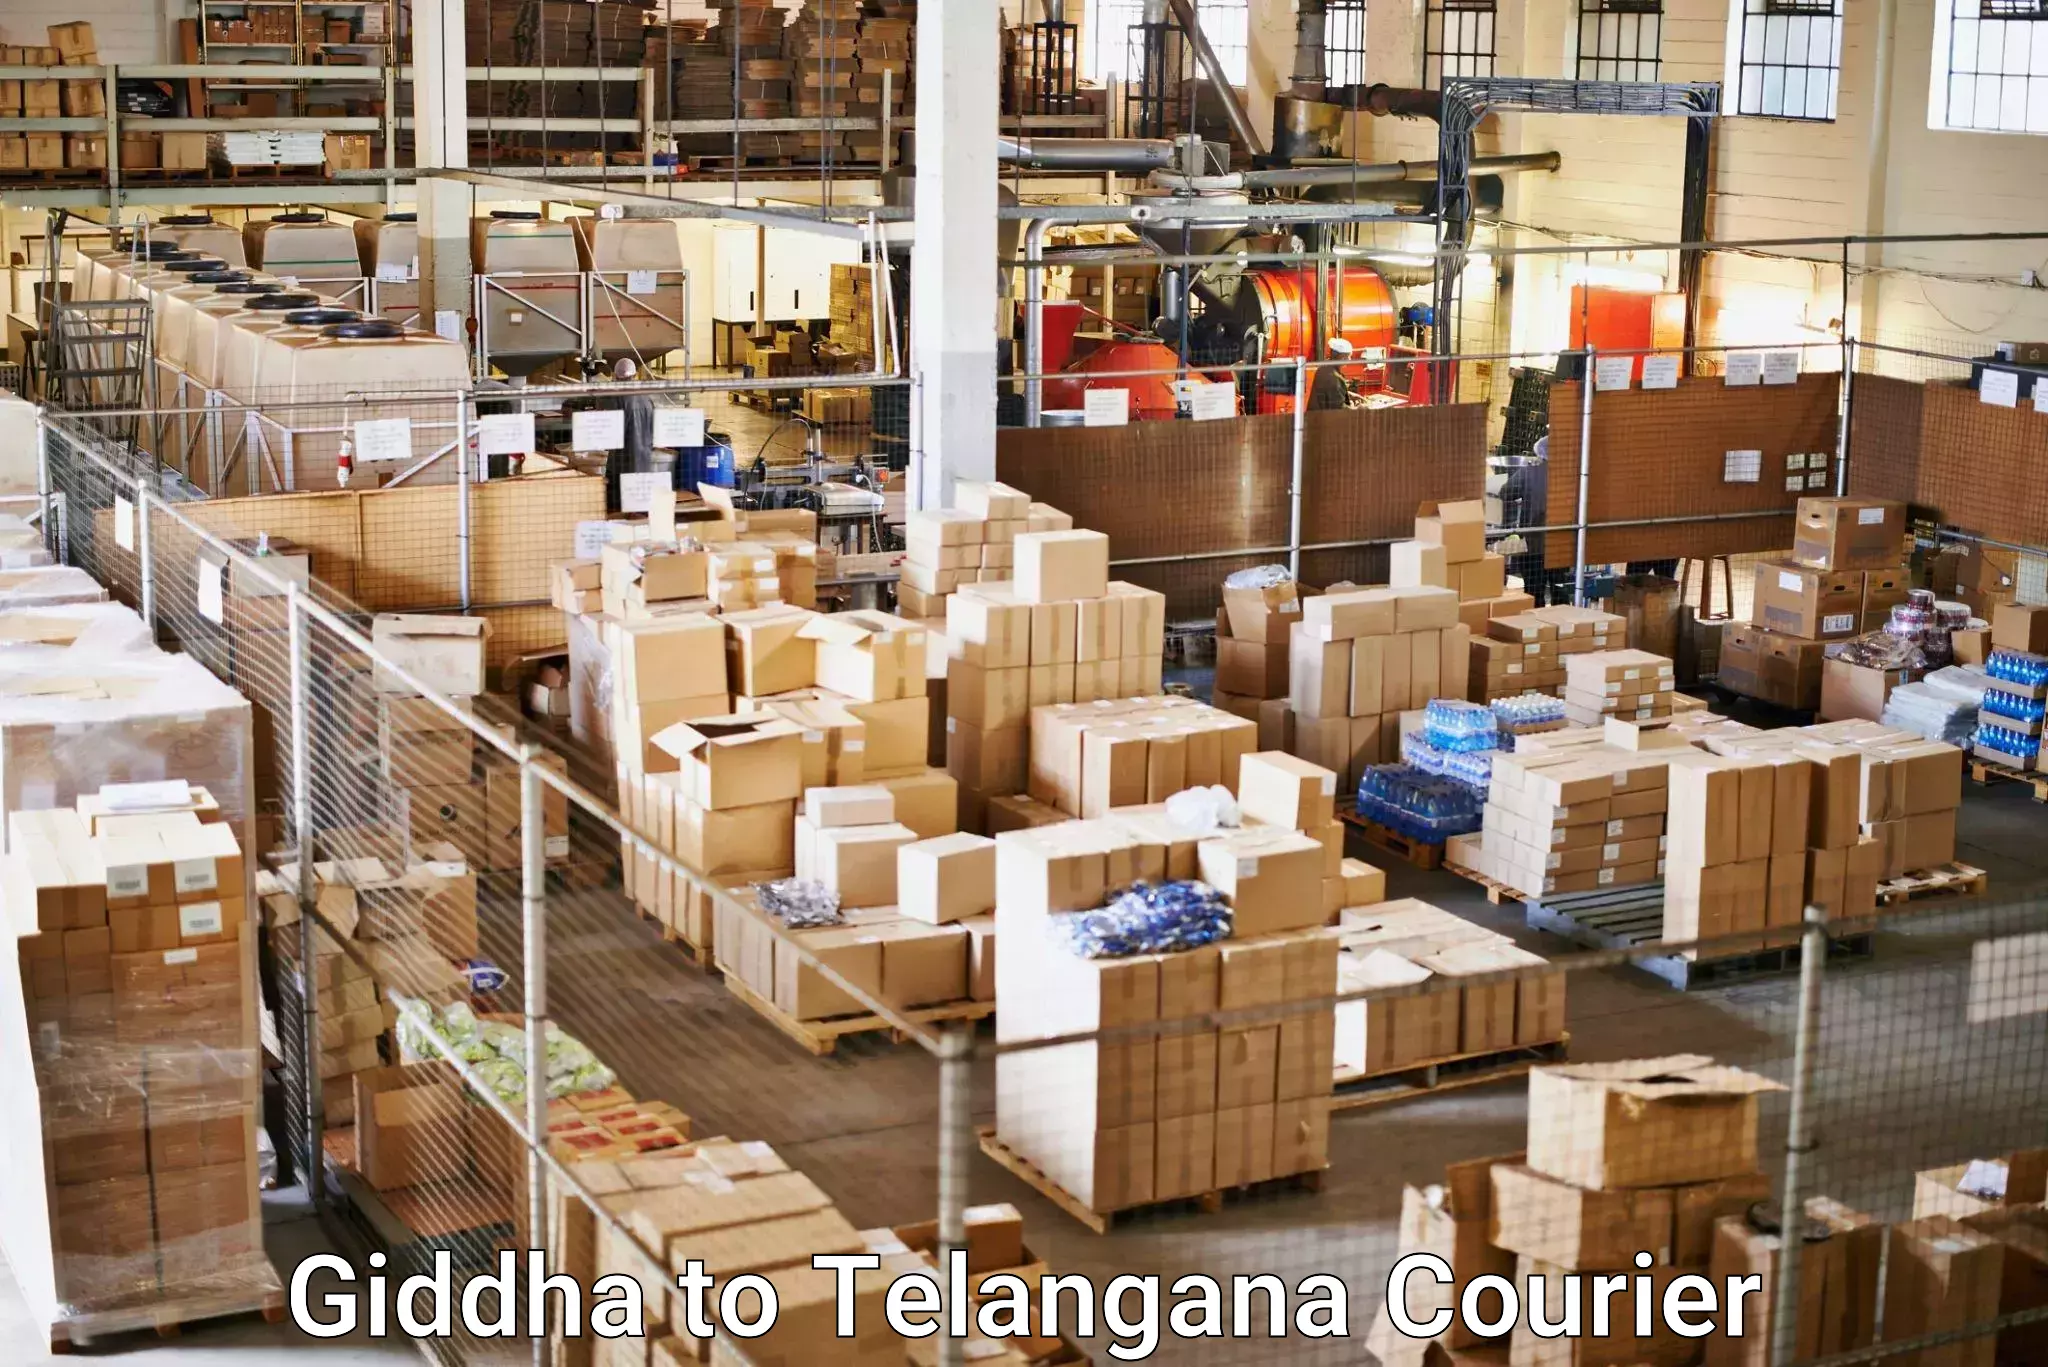 Seamless shipping experience Giddha to Secunderabad